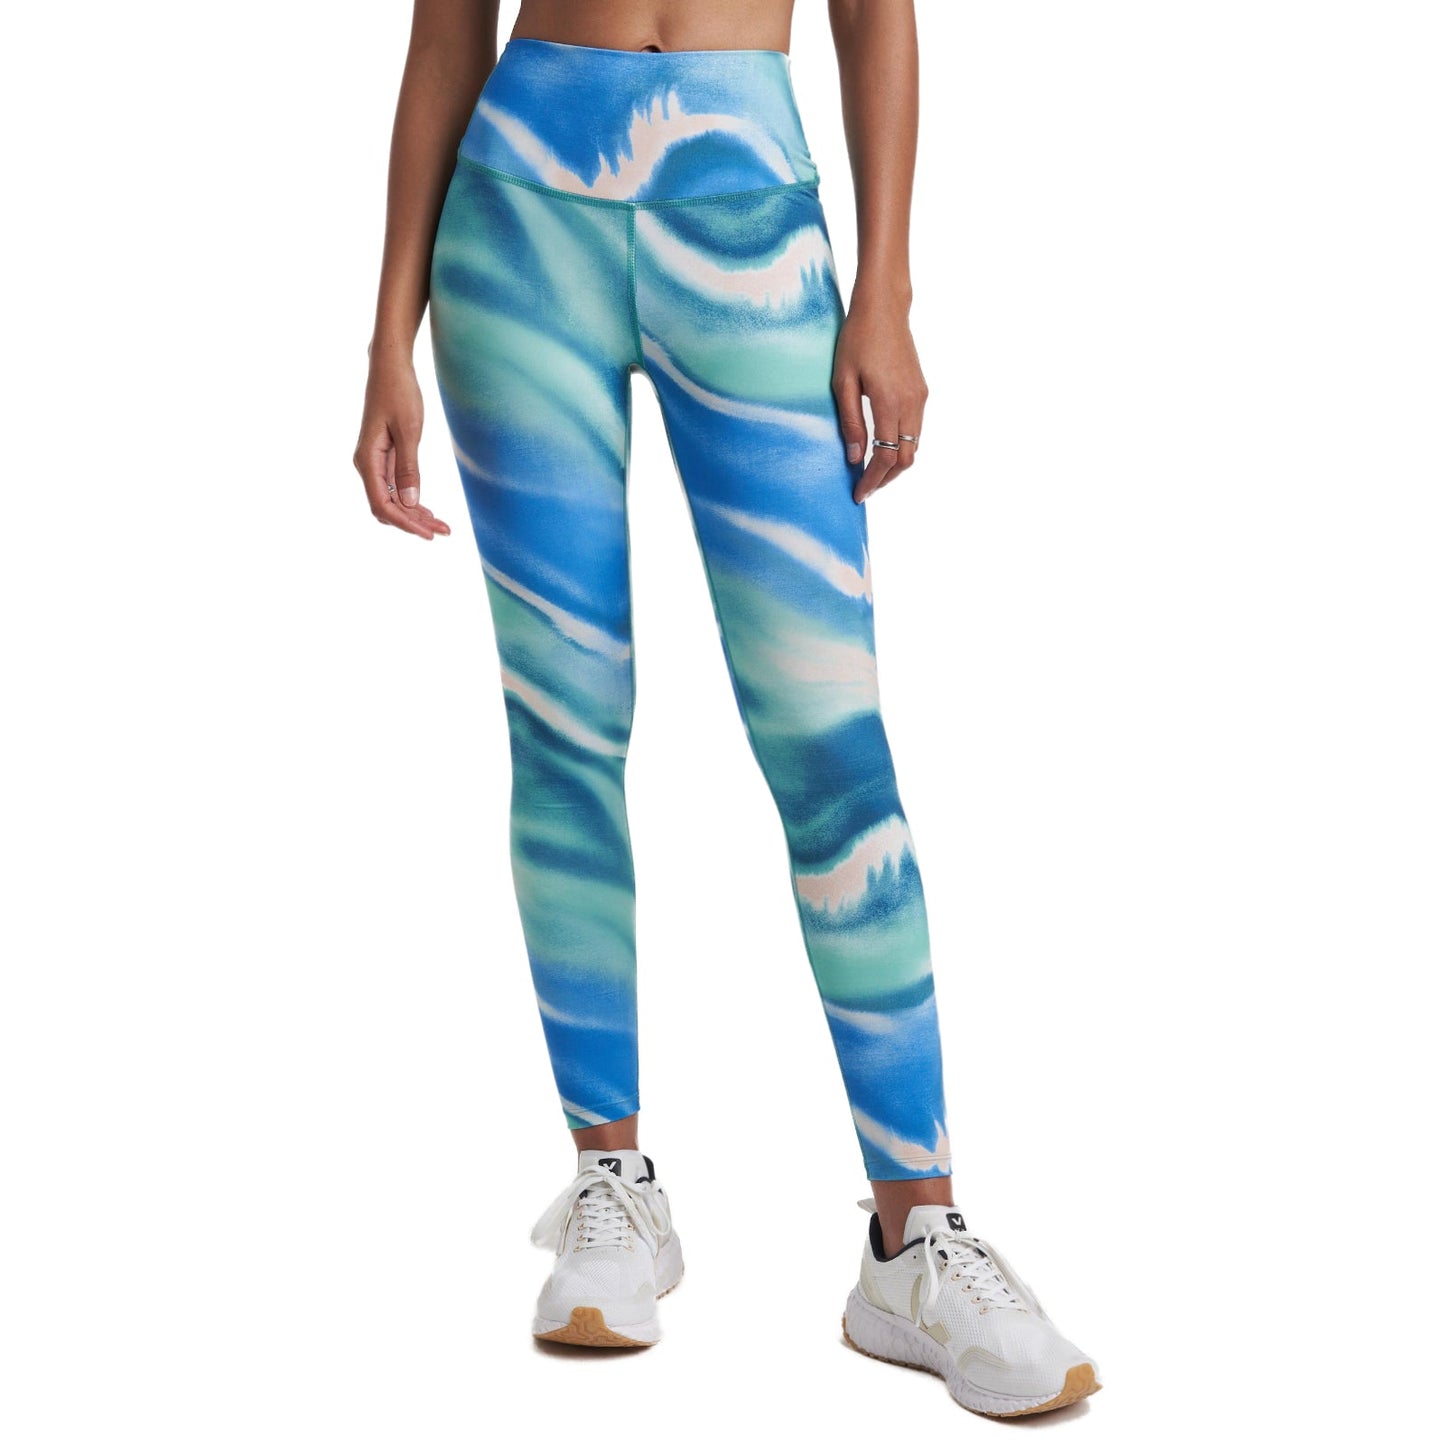 SPLITS59 Women's High Waist Moister Wicking Marbled Print Bardot Leggings and Top Collection